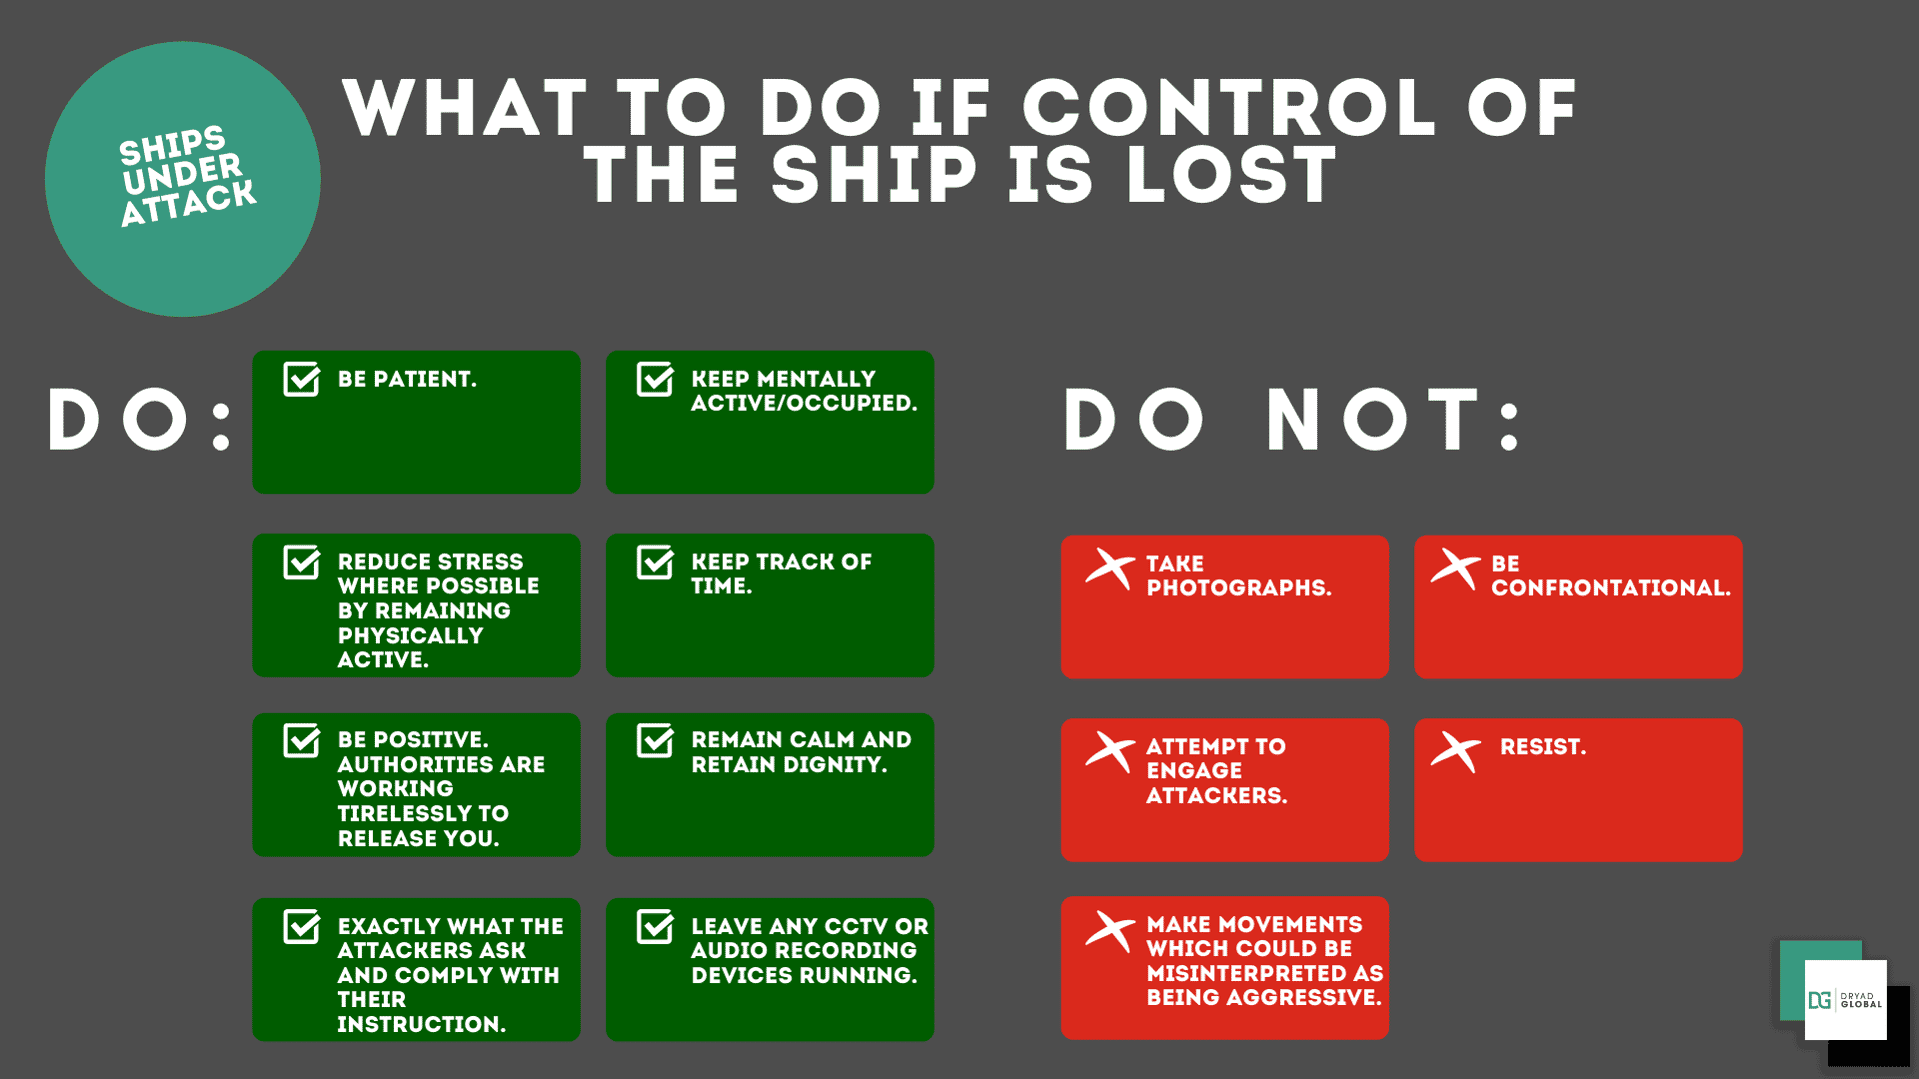 What to do If control of the ship is lost